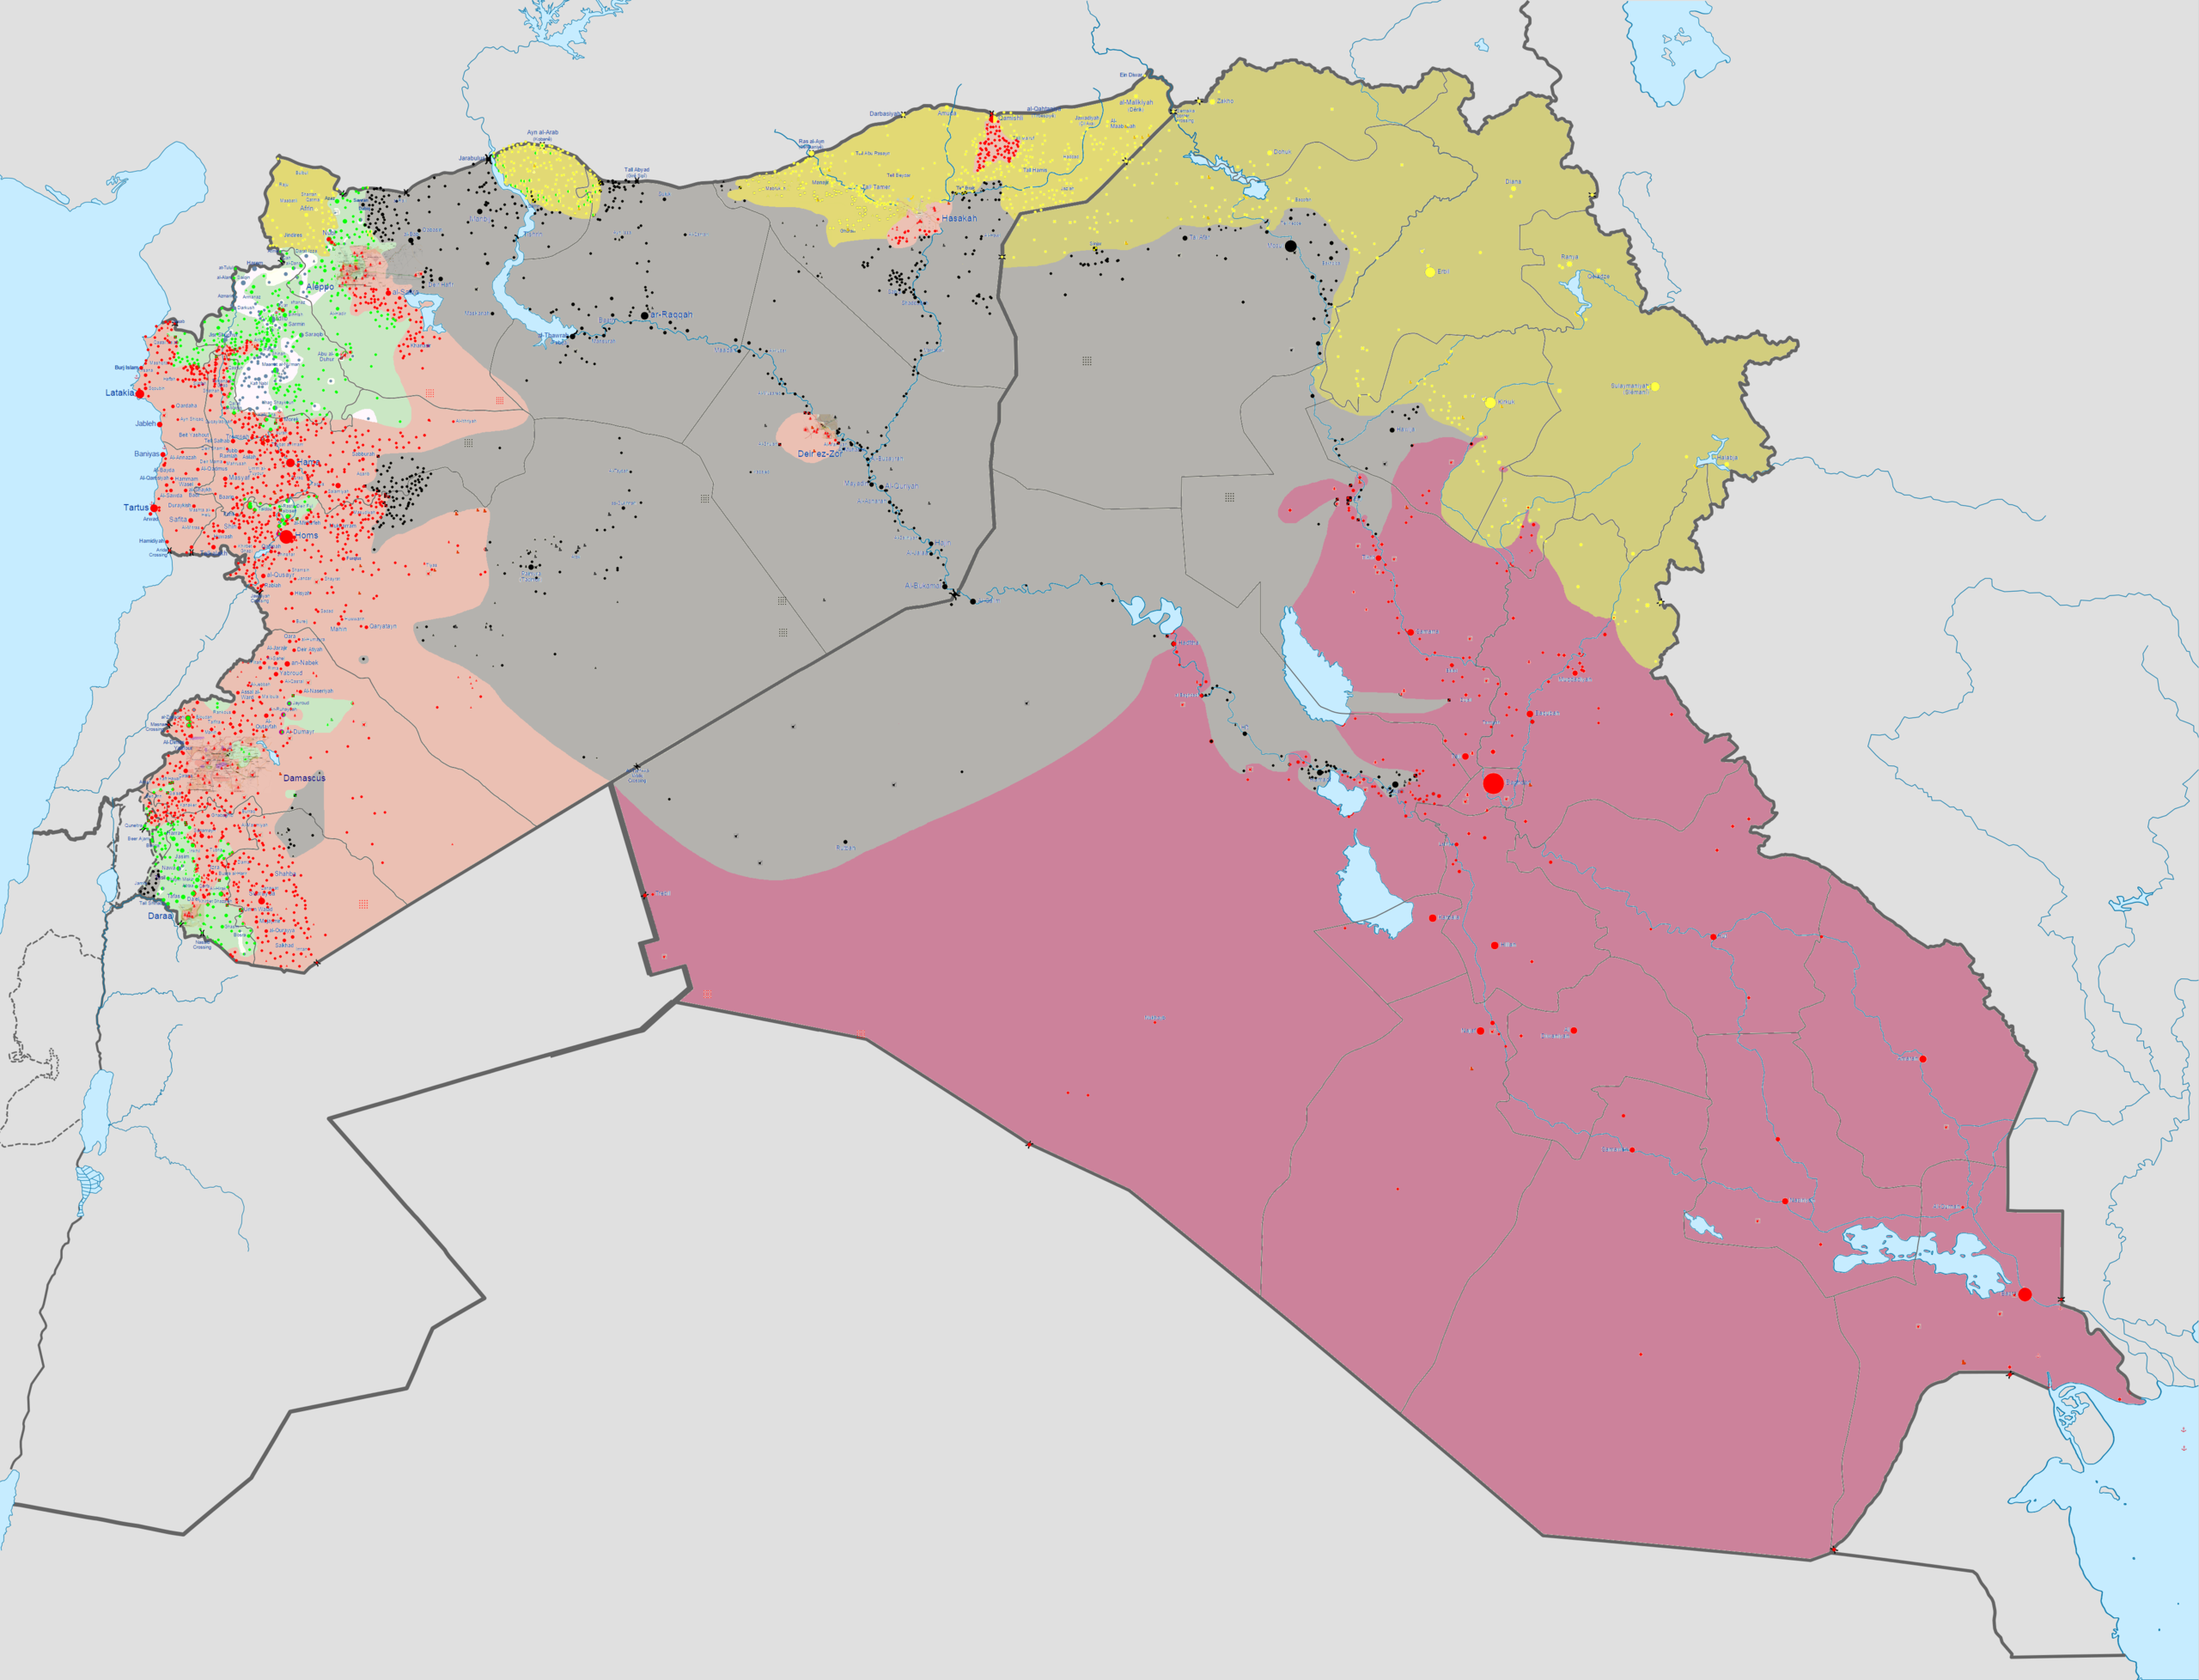 Territory controlled by the Islamic State in May 2015